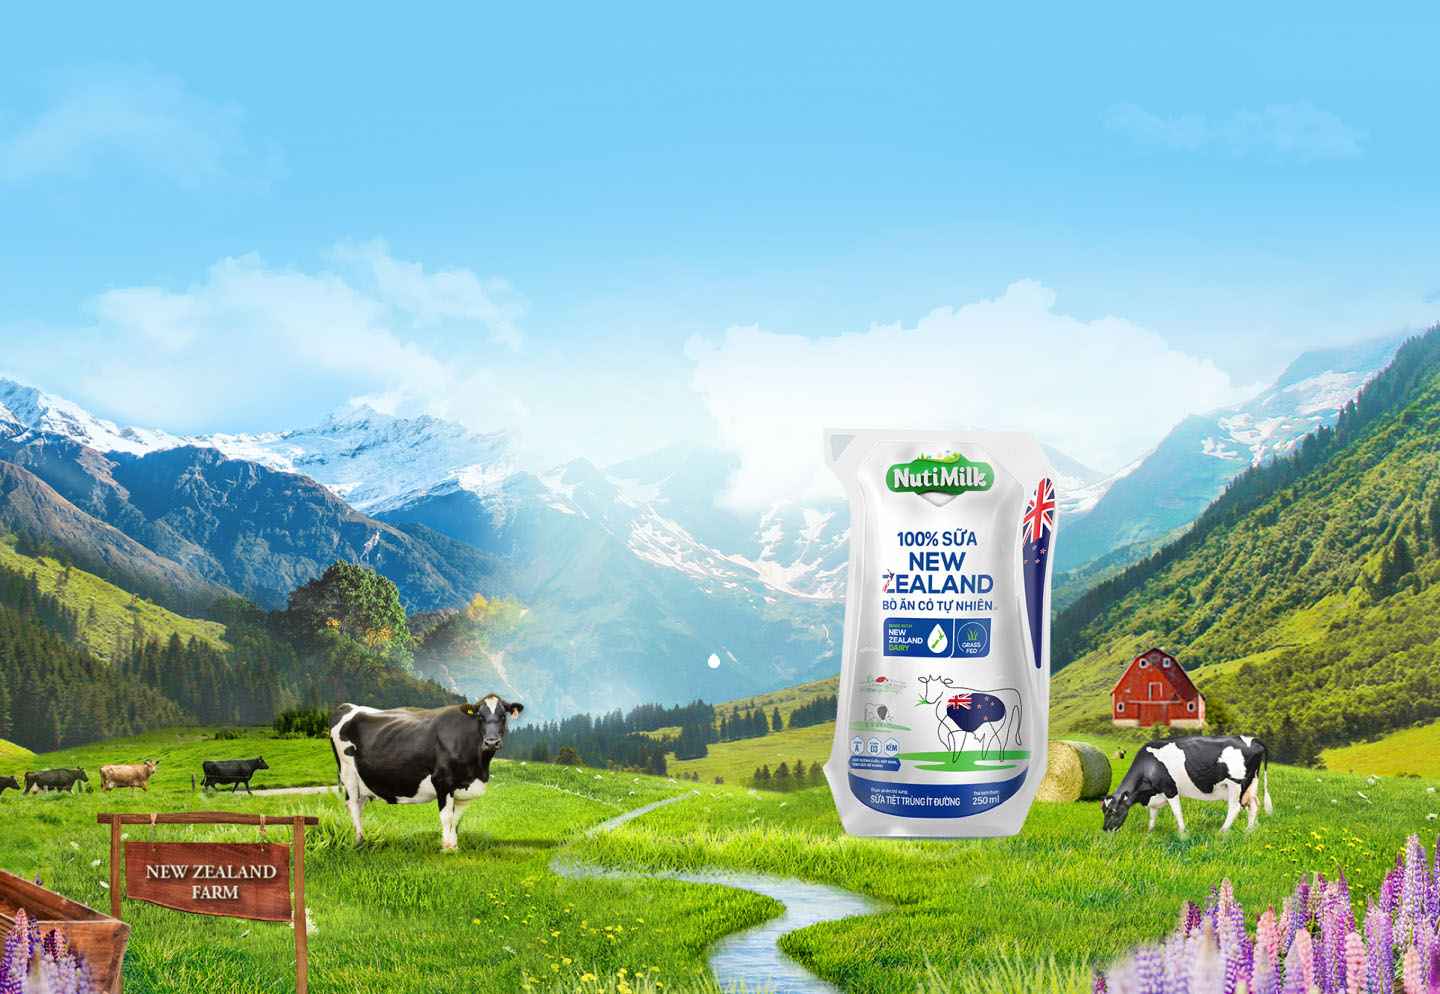 New Zealand Milk made from 100% natural grass-fed cows